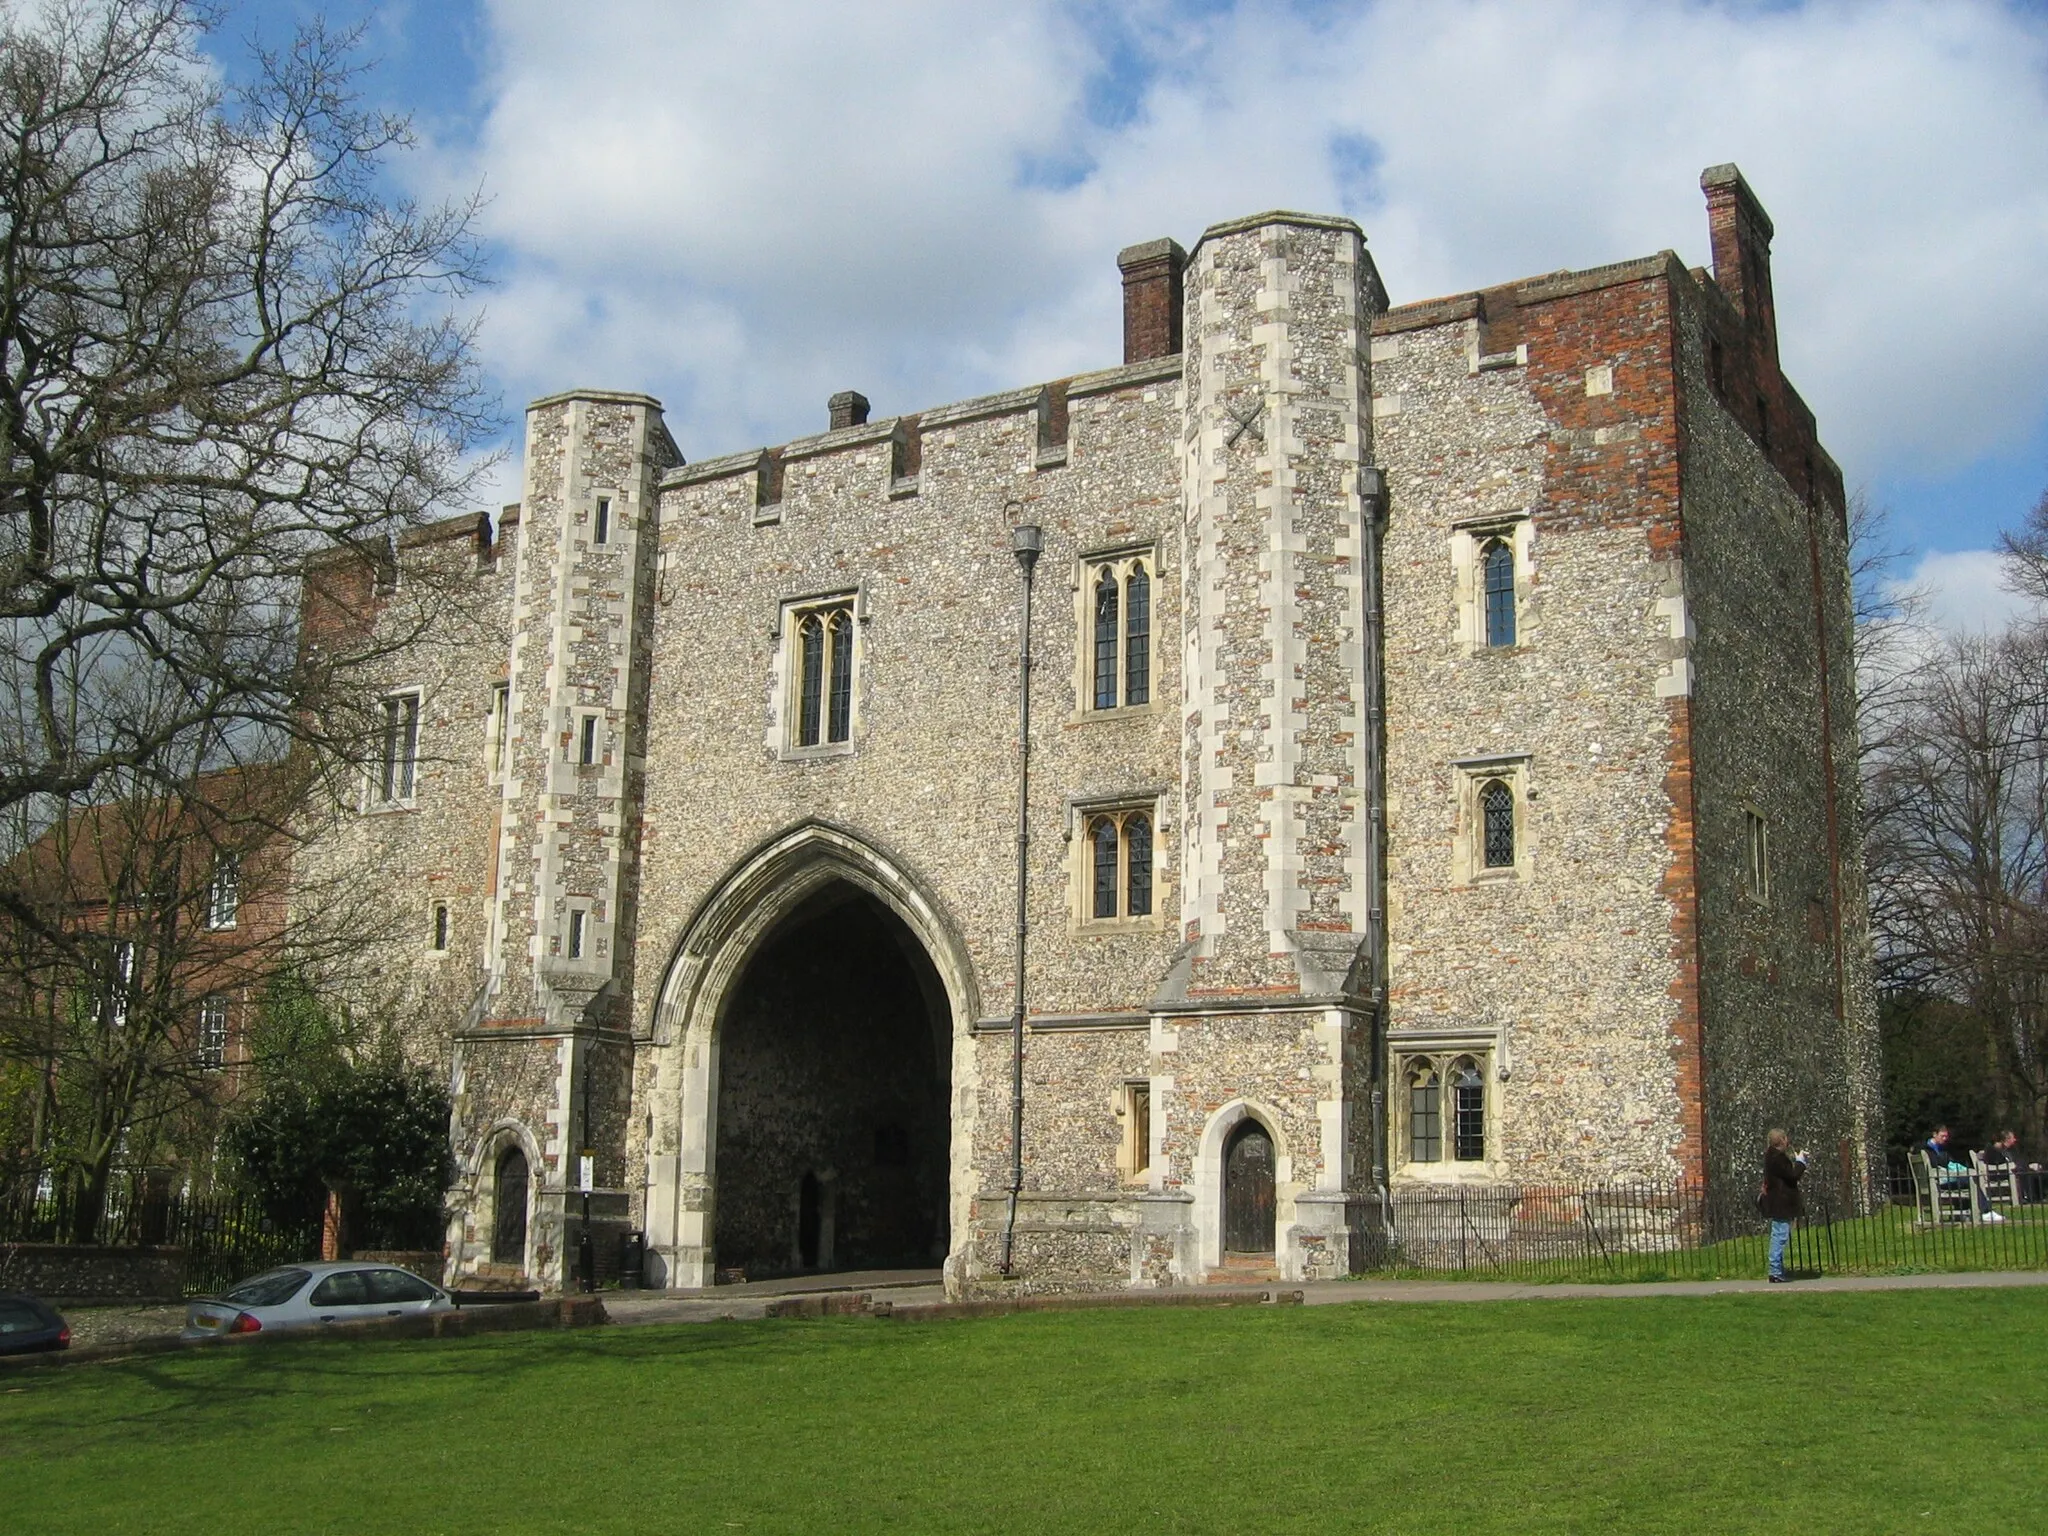 Photo showing: Gateway of former St Albans Abbey, Hertfordshire, UK; Abbey Gateway from the 1360s